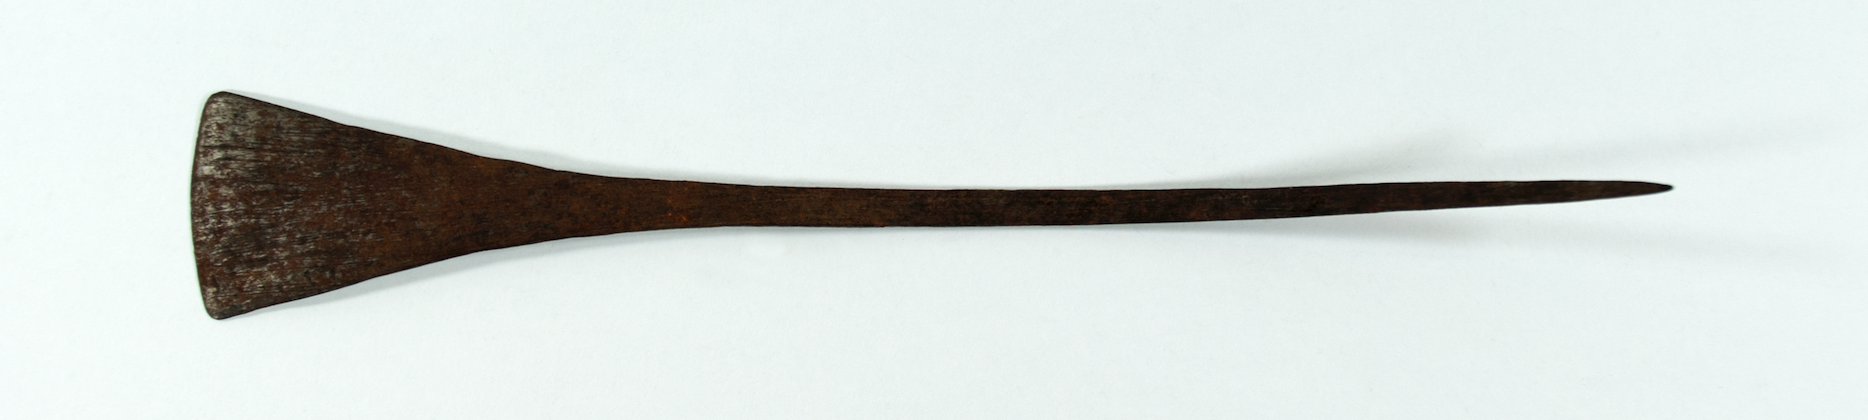  An iron hairpin with a triangular head that tapers down into a point.